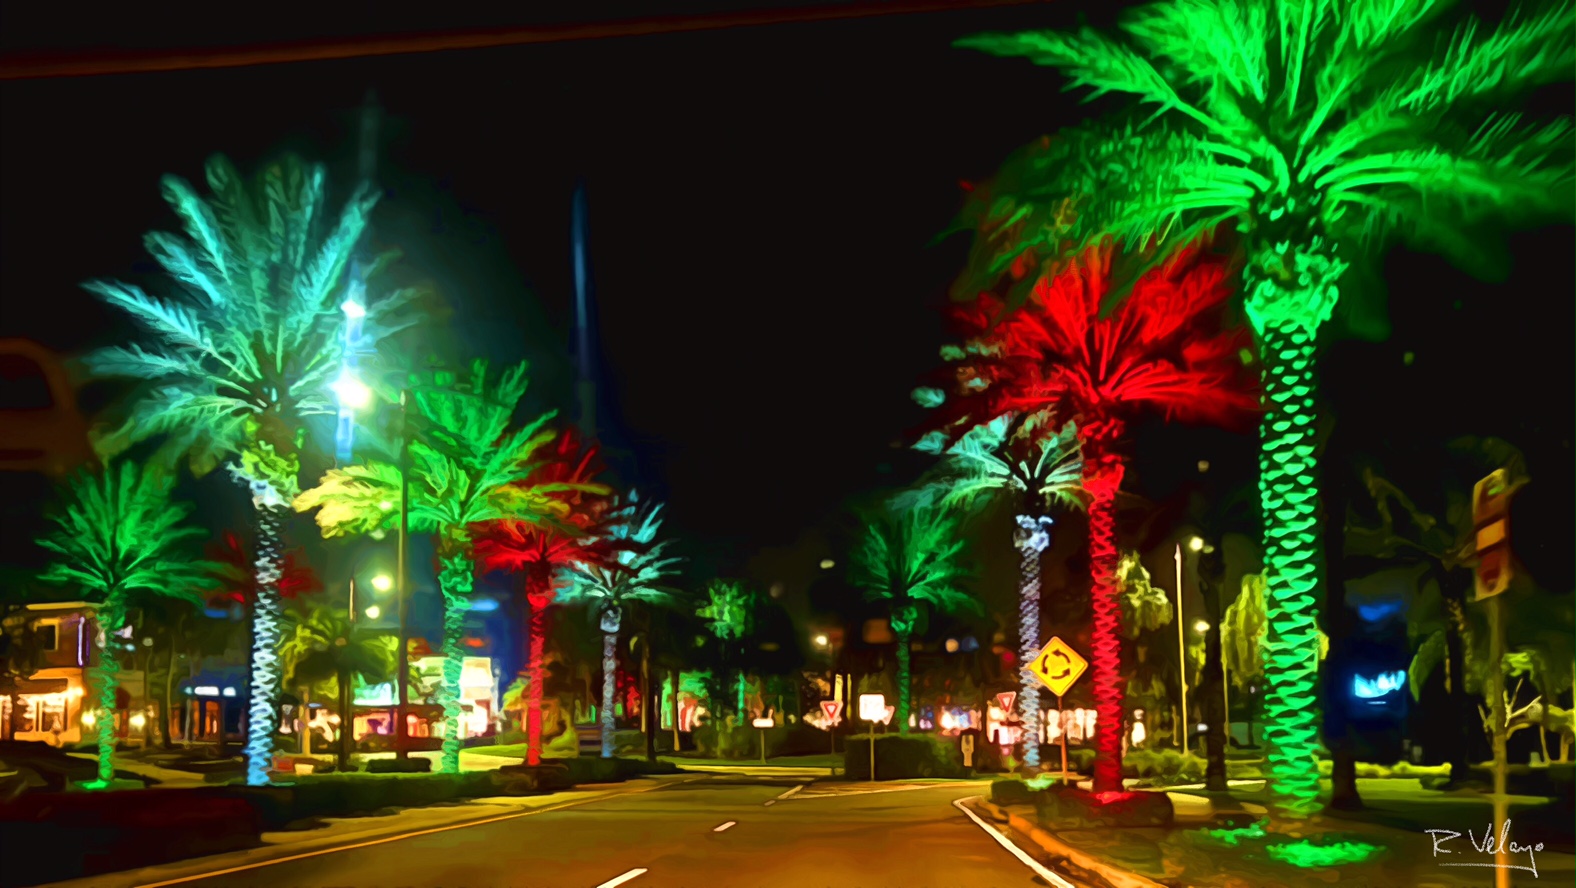 "CHRISTMAS-THEMED PALM TREES EN ROUTE TO MARGARITAVILLE RESORT" [Created: 9/25/2022]